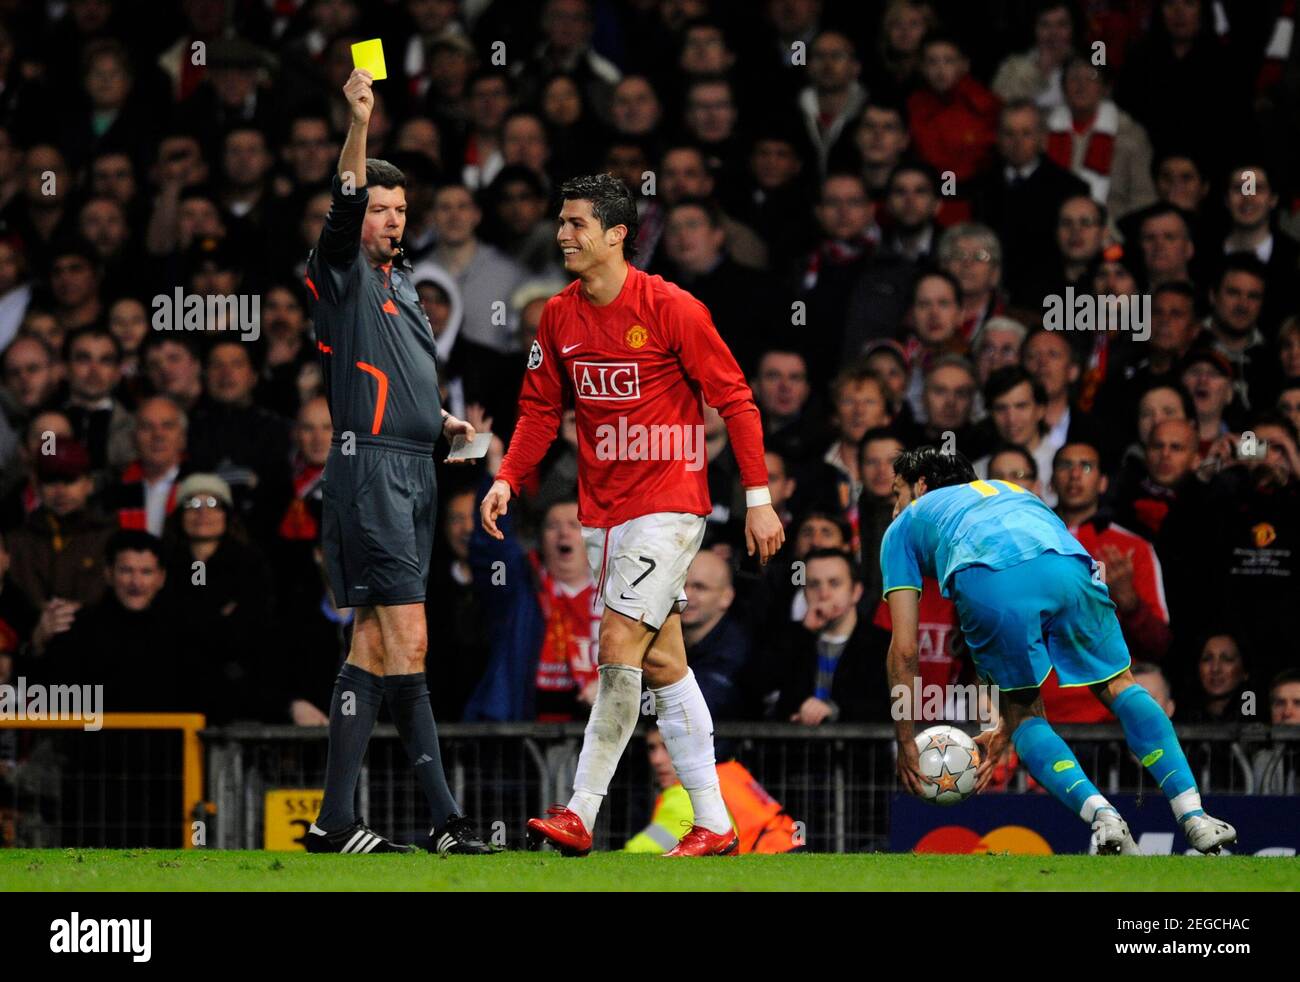 Football - Manchester United v FC Barcelona - UEFA Champions League Semi  Final - Second Leg - Old Trafford - 07/08 - 29/4/08 Manchester United's  Cristiano Ronaldo is shown the yellow card